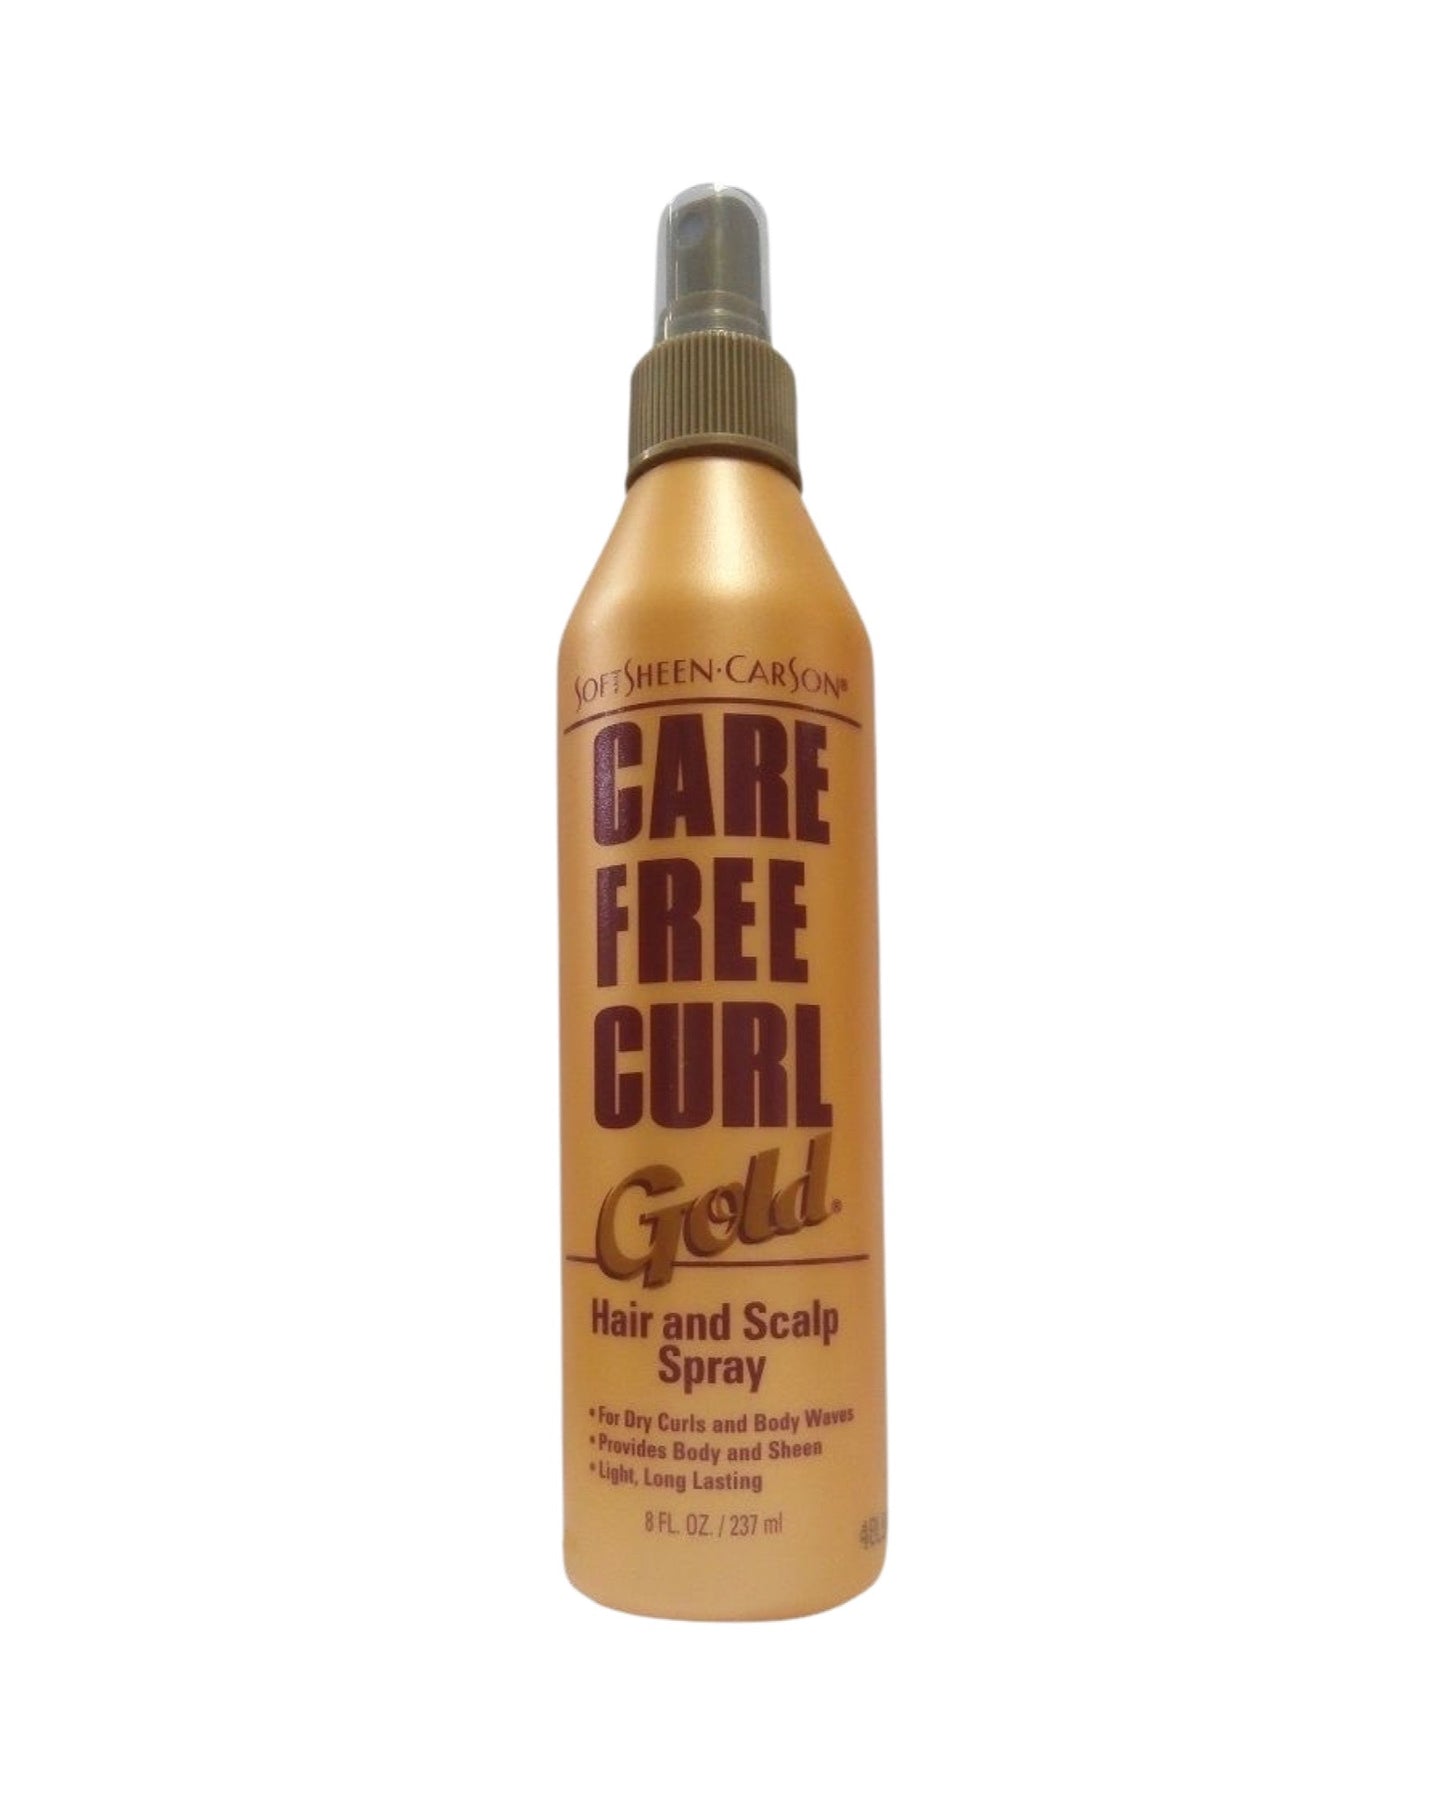 Softsheen Carson Care Free Curl Gold Hair And Scalp Spray 237Ml